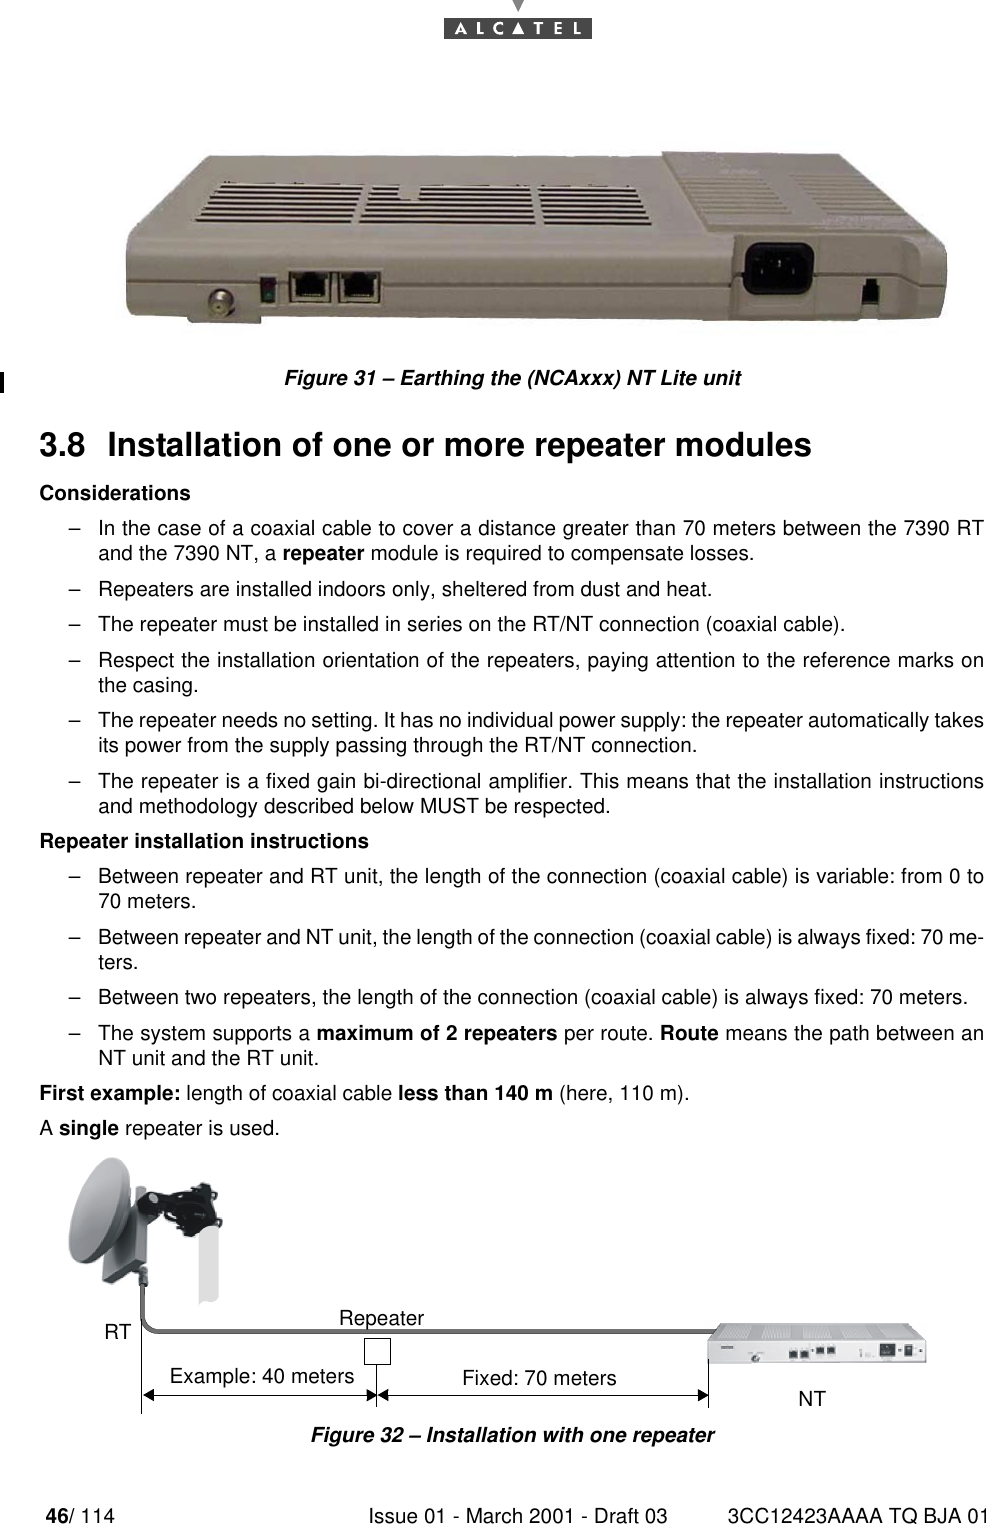 46/ 114 Issue 01 - March 2001 - Draft 03 3CC12423AAAA TQ BJA 0152Figure 31 – Earthing the (NCAxxx) NT Lite unit3.8  Installation of one or more repeater modulesConsiderations–In the case of a coaxial cable to cover a distance greater than 70 meters between the 7390 RTand the 7390 NT, a repeater module is required to compensate losses.–Repeaters are installed indoors only, sheltered from dust and heat.–The repeater must be installed in series on the RT/NT connection (coaxial cable).–Respect the installation orientation of the repeaters, paying attention to the reference marks onthe casing.–The repeater needs no setting. It has no individual power supply: the repeater automatically takesits power from the supply passing through the RT/NT connection.–The repeater is a fixed gain bi-directional amplifier. This means that the installation instructionsand methodology described below MUST be respected.Repeater installation instructions–Between repeater and RT unit, the length of the connection (coaxial cable) is variable: from 0 to70 meters.–Between repeater and NT unit, the length of the connection (coaxial cable) is always fixed: 70 me-ters.–Between two repeaters, the length of the connection (coaxial cable) is always fixed: 70 meters.–The system supports a maximum of 2 repeaters per route. Route means the path between anNT unit and the RT unit.First example: length of coaxial cable less than 140 m (here, 110 m).A single repeater is used.Figure 32 – Installation with one repeaterRTNTExample: 40 meters Fixed: 70 metersRepeater